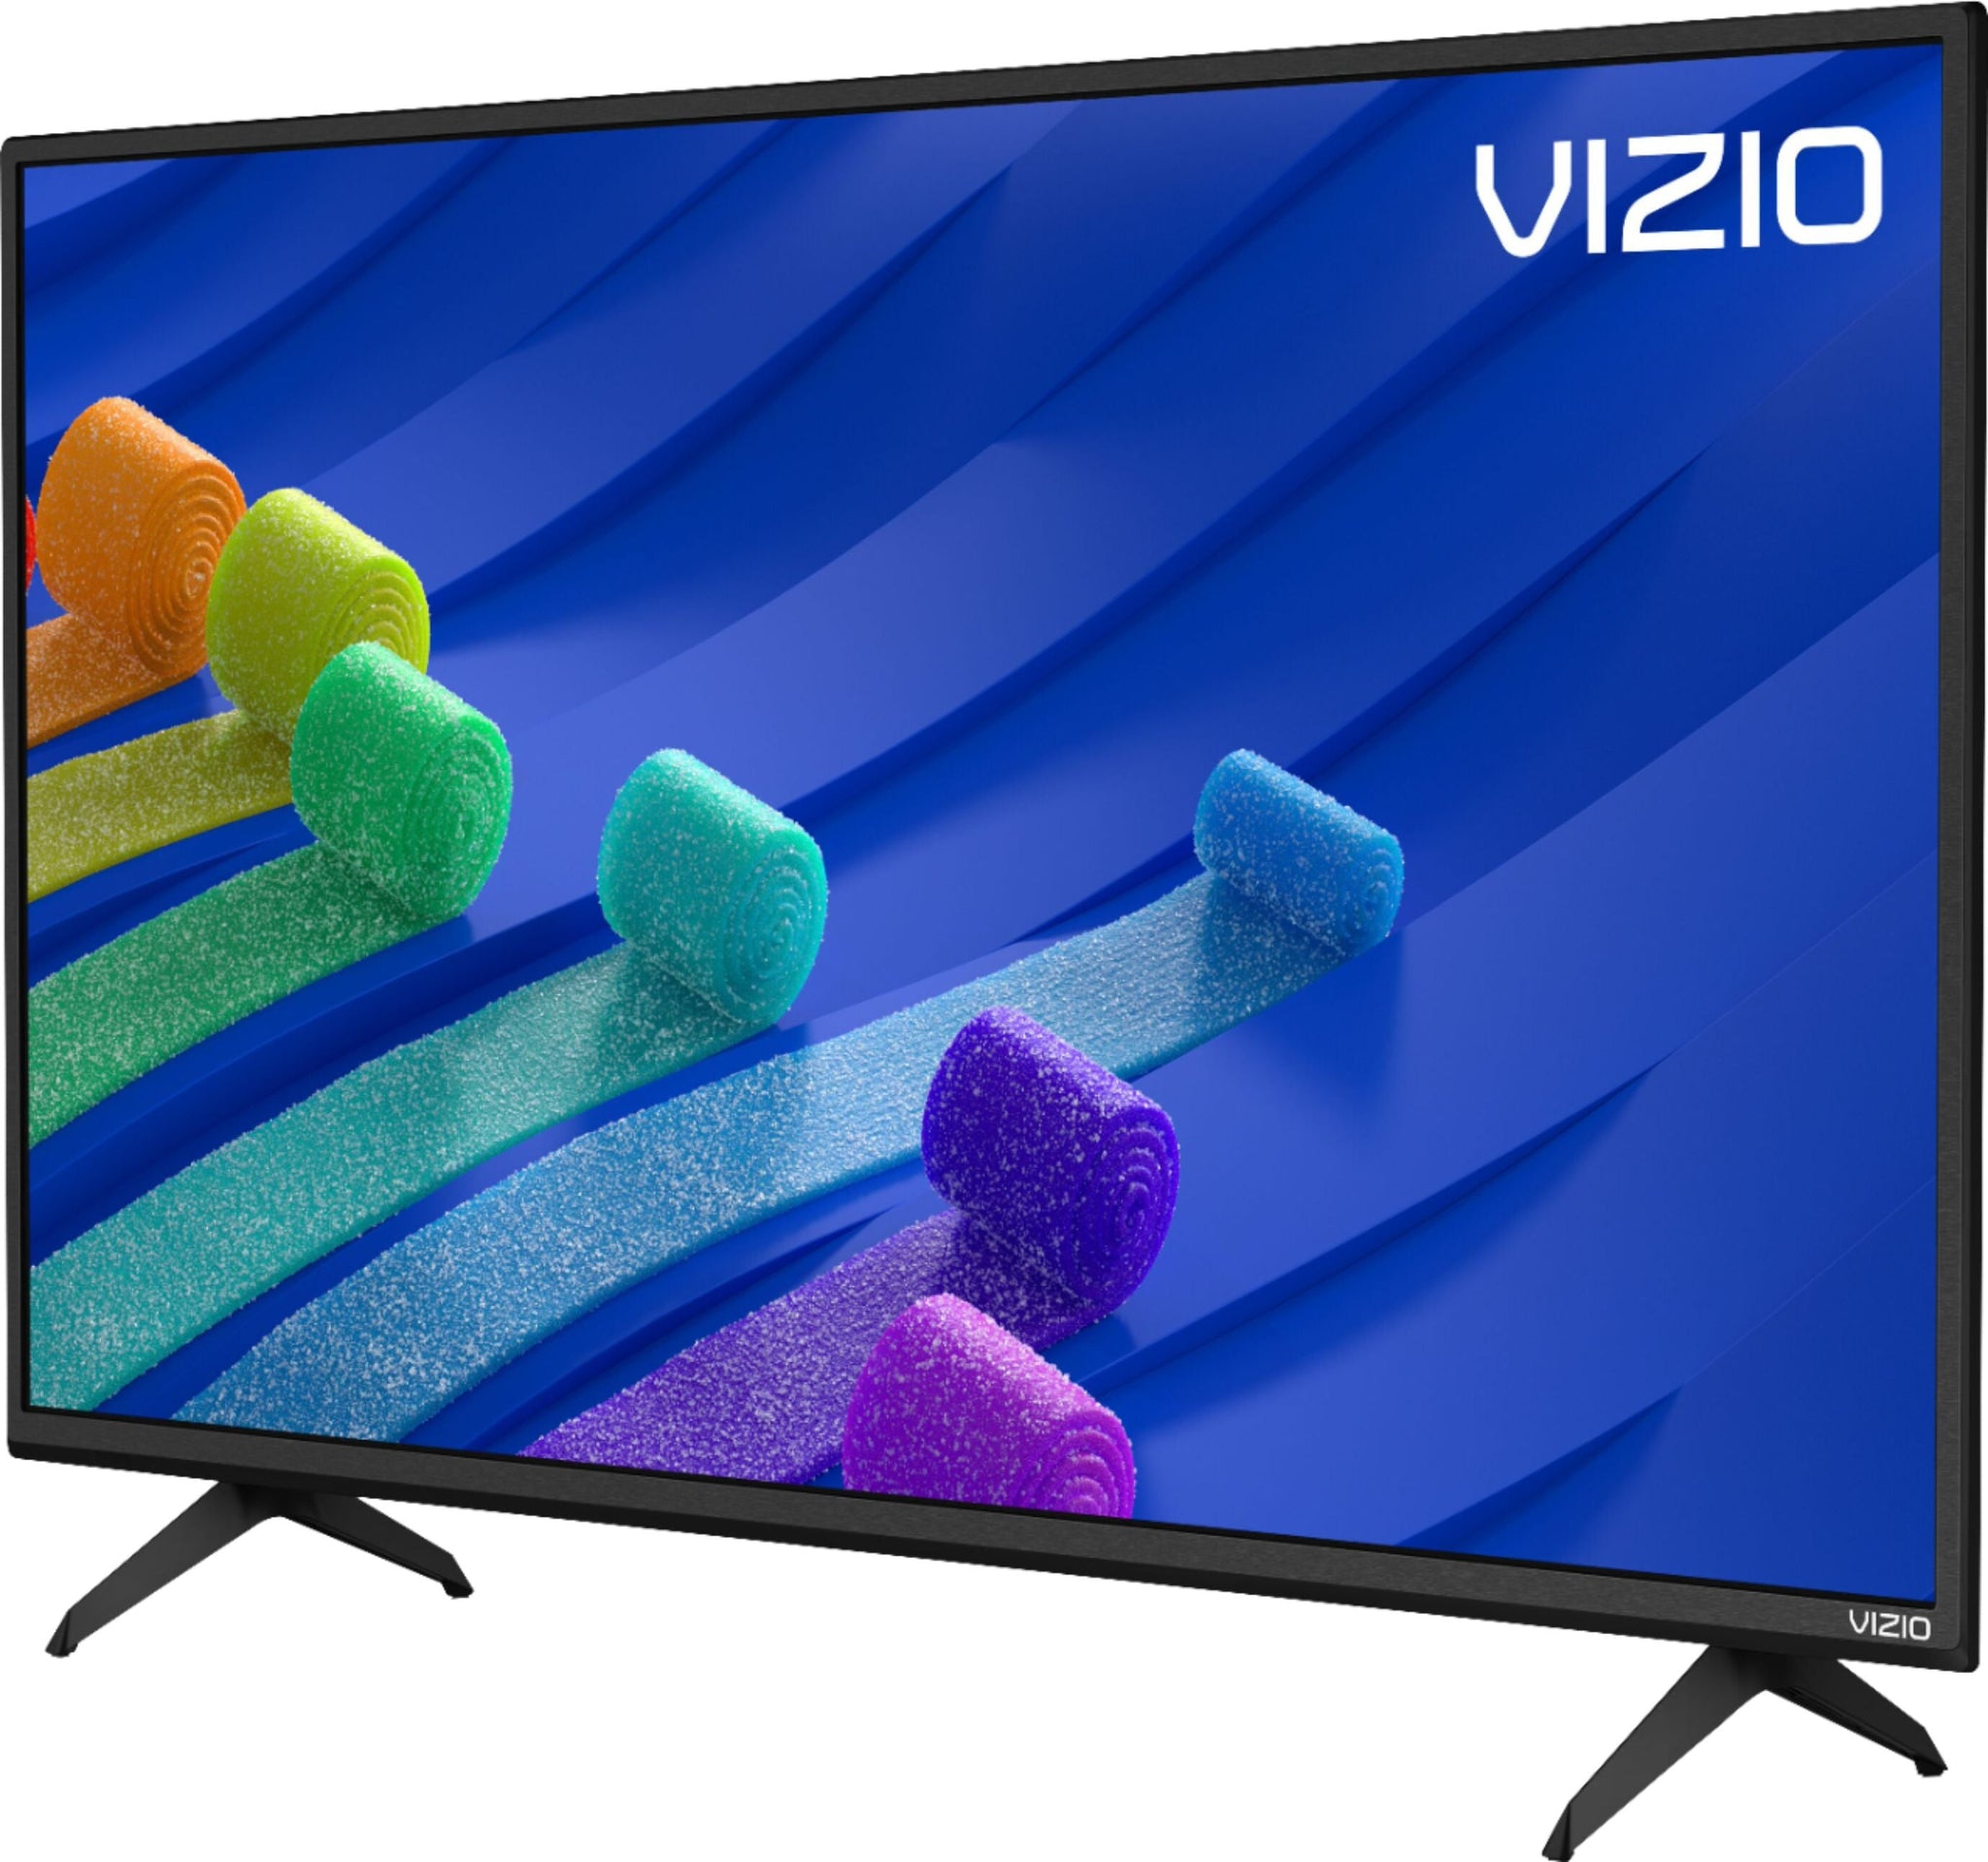 VIZIO 40" Class D-Series LED 1080P Smart TV(Refurbished) Tv's ONLY for delivery in San Diego and Tijuana